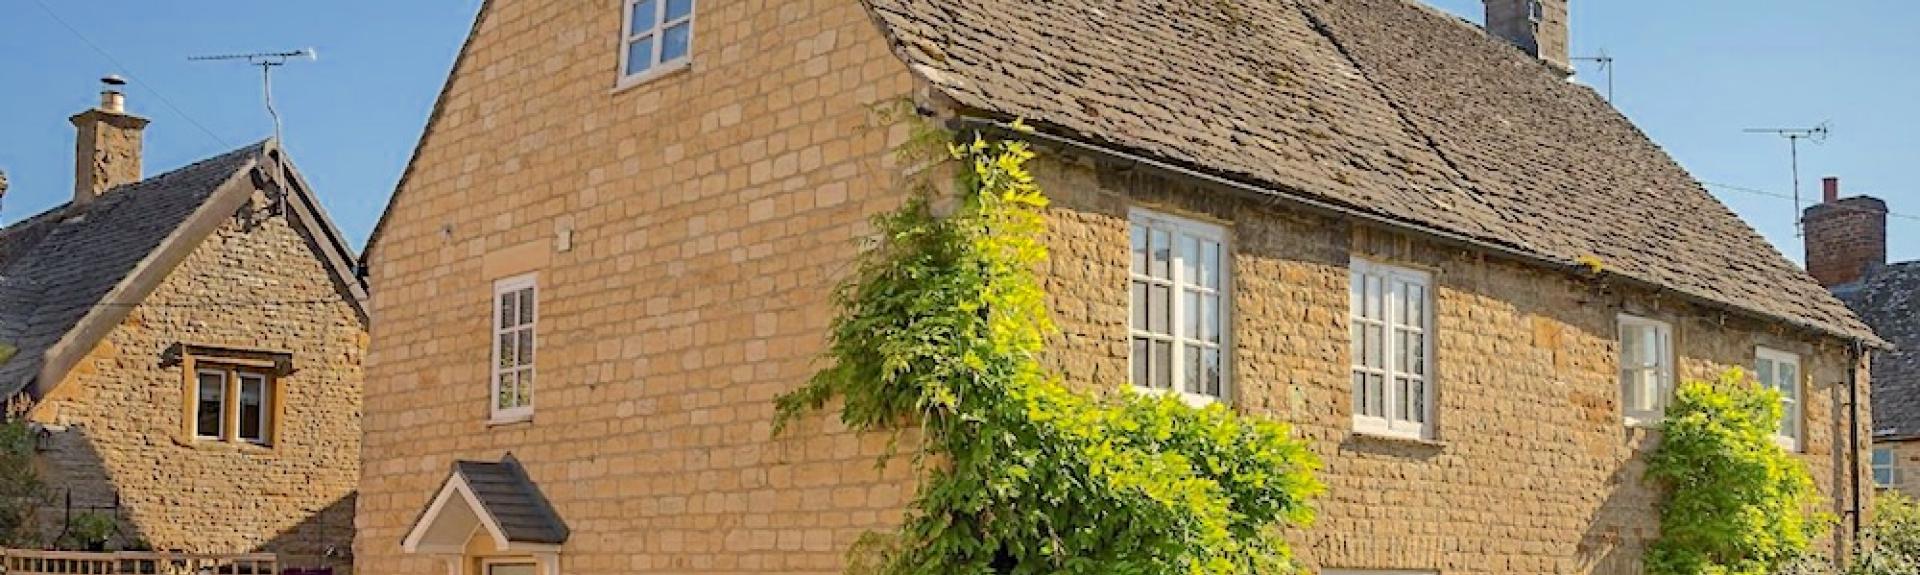 A  wisteria-clad, stone-built, Cotswold 'Honeystone' Cottage